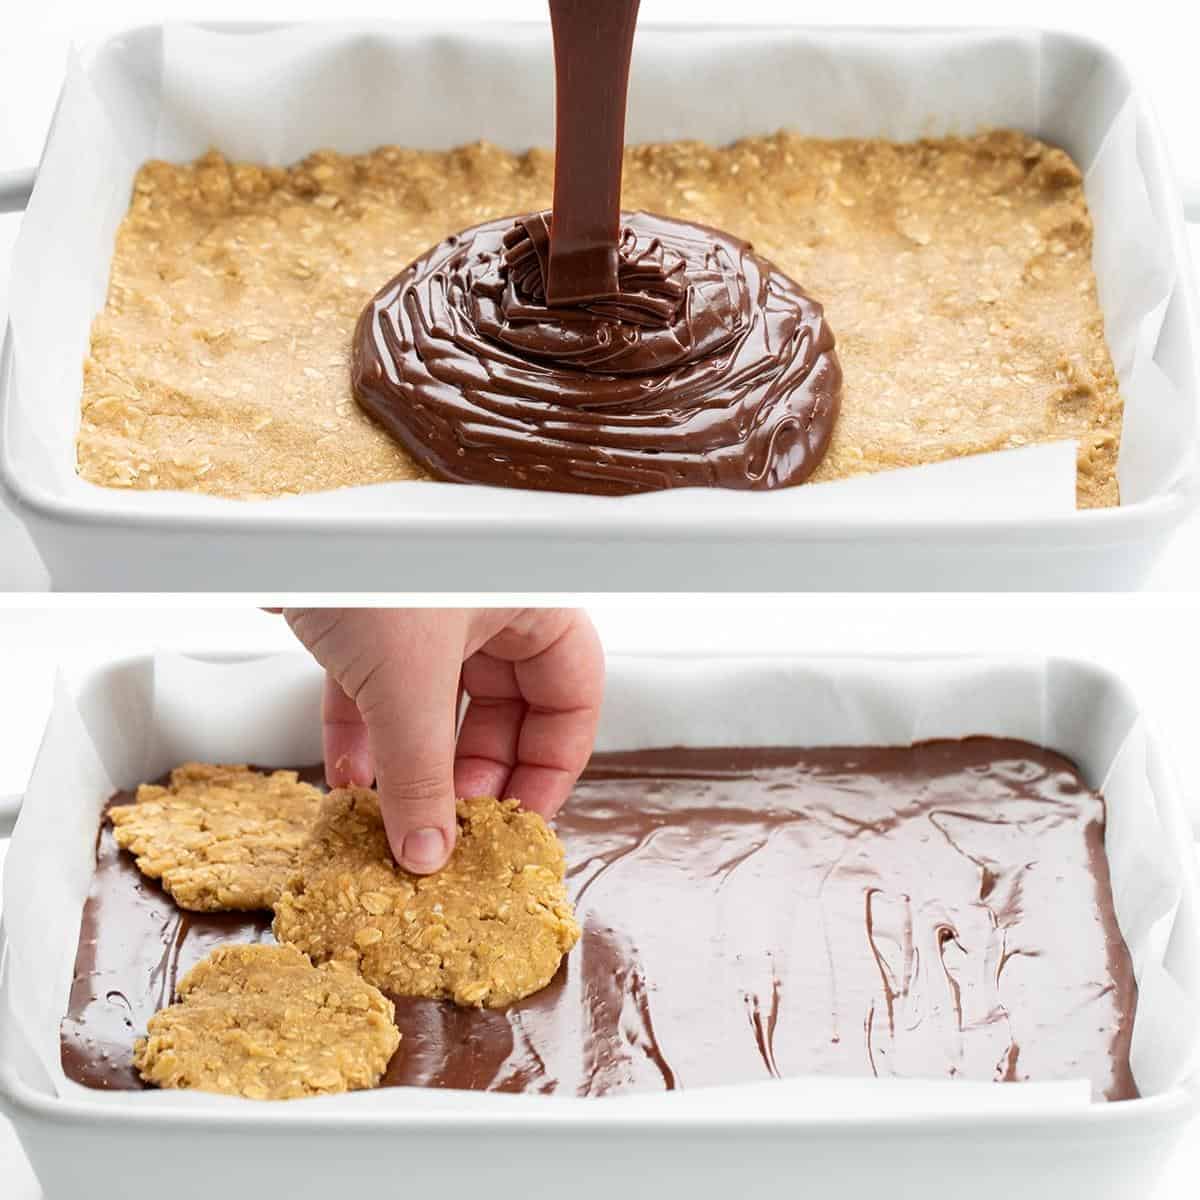 Adding Fudge and then Oatmeal Rounds to a Pan to Make Revel Bars